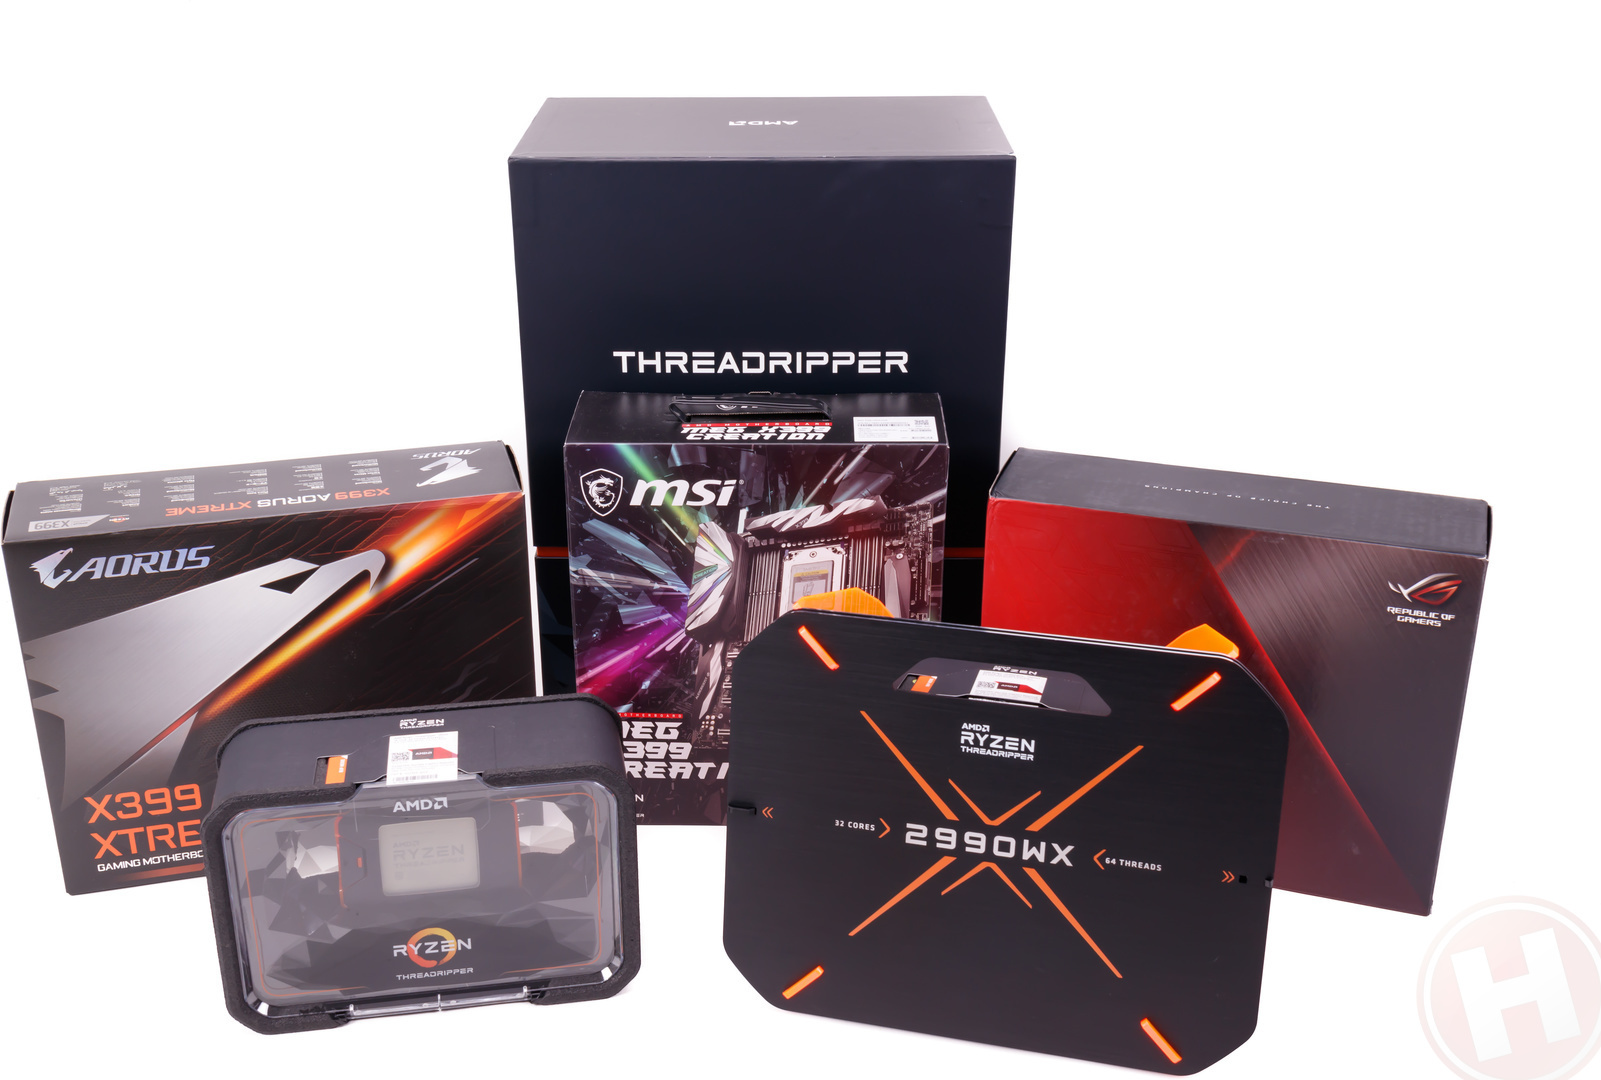 Today AMD Officially launched second generation Threadripper 2000 CPUs